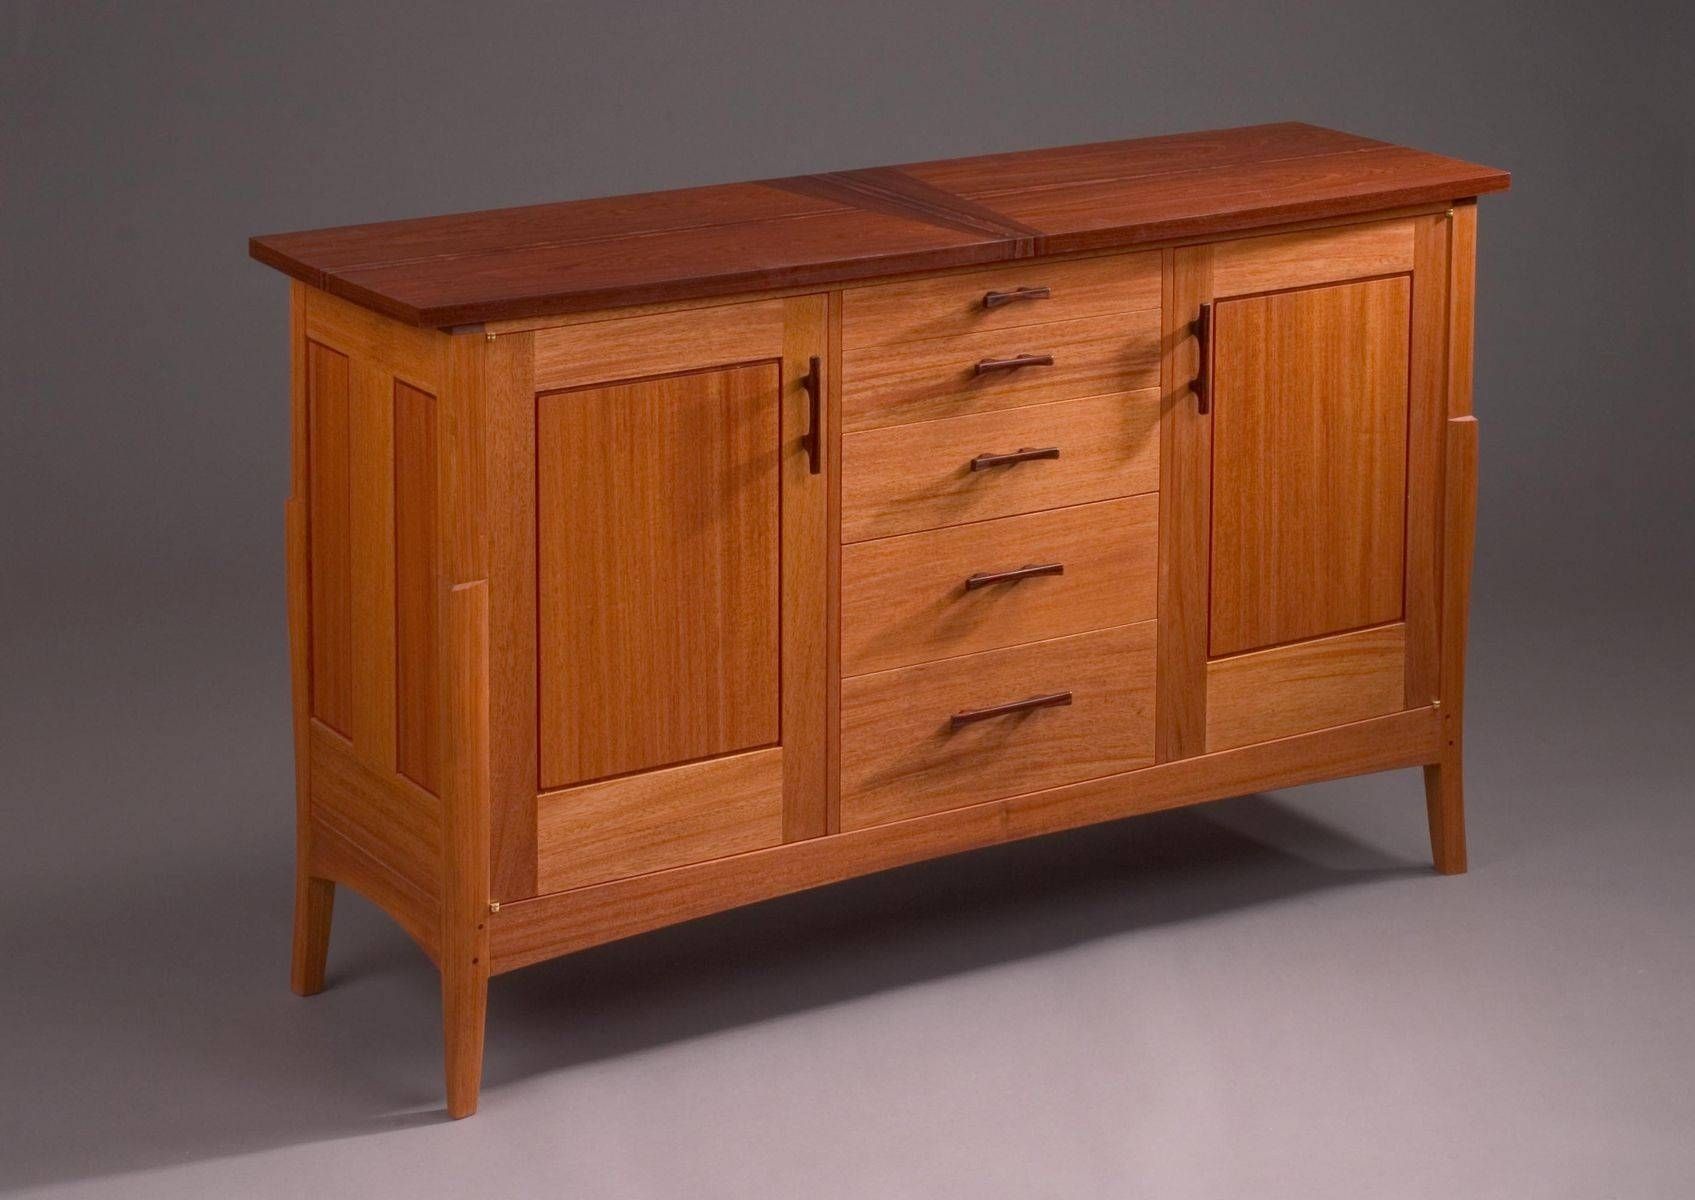 Hand Crafted Mahogany Musician's Sideboardpat Megowan Designer Within Recent Mission Style Sideboards (View 14 of 15)